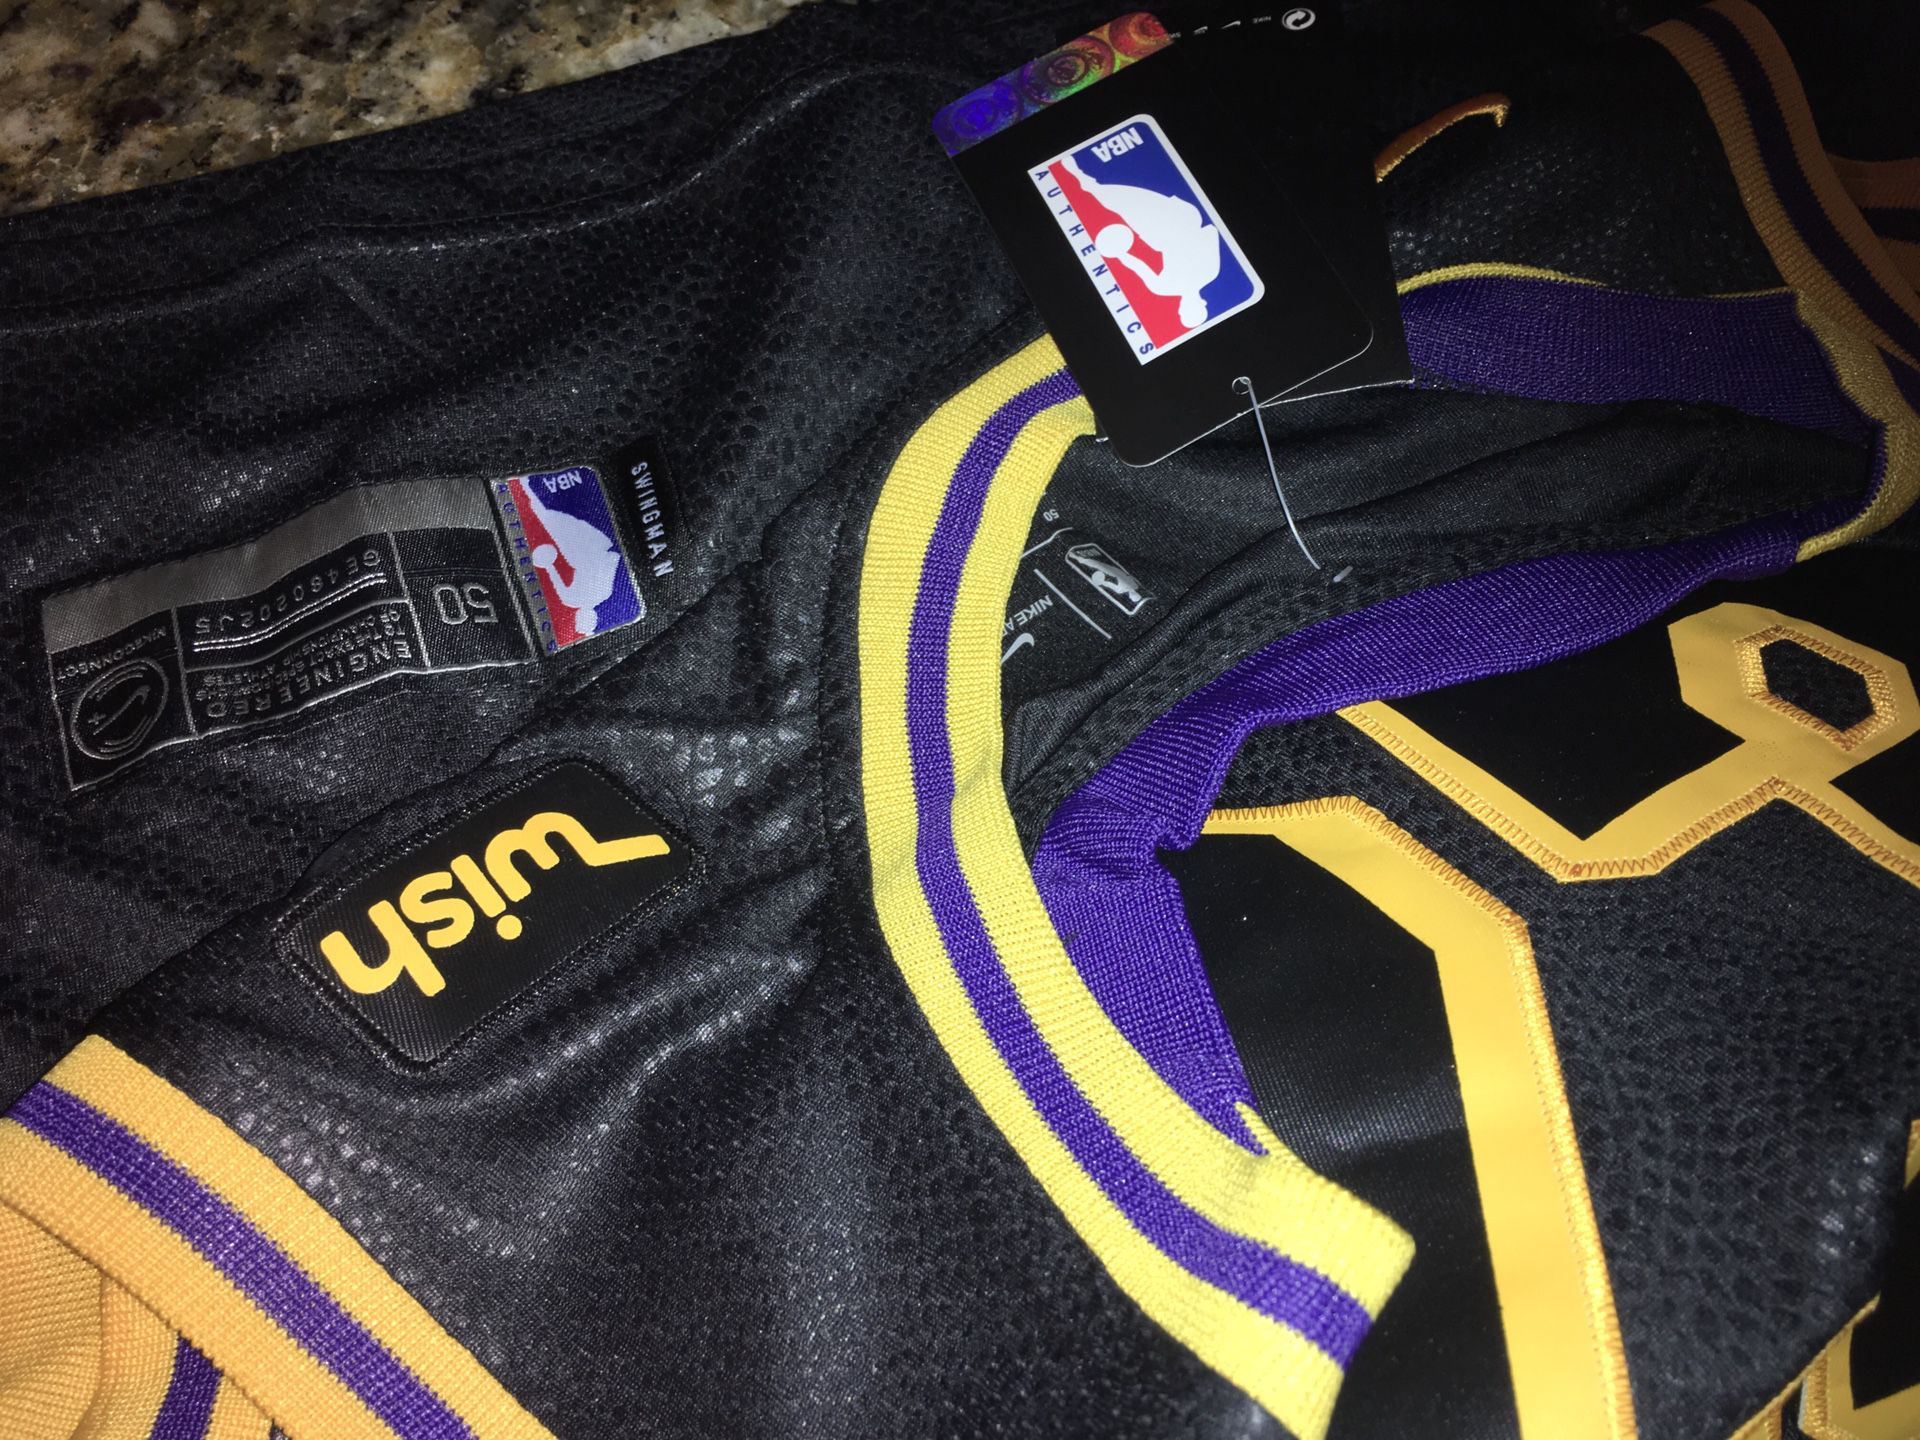 Nike Nba Basketball Jersey 2023 Lakers James 6 white for Sale in Miami, FL  - OfferUp